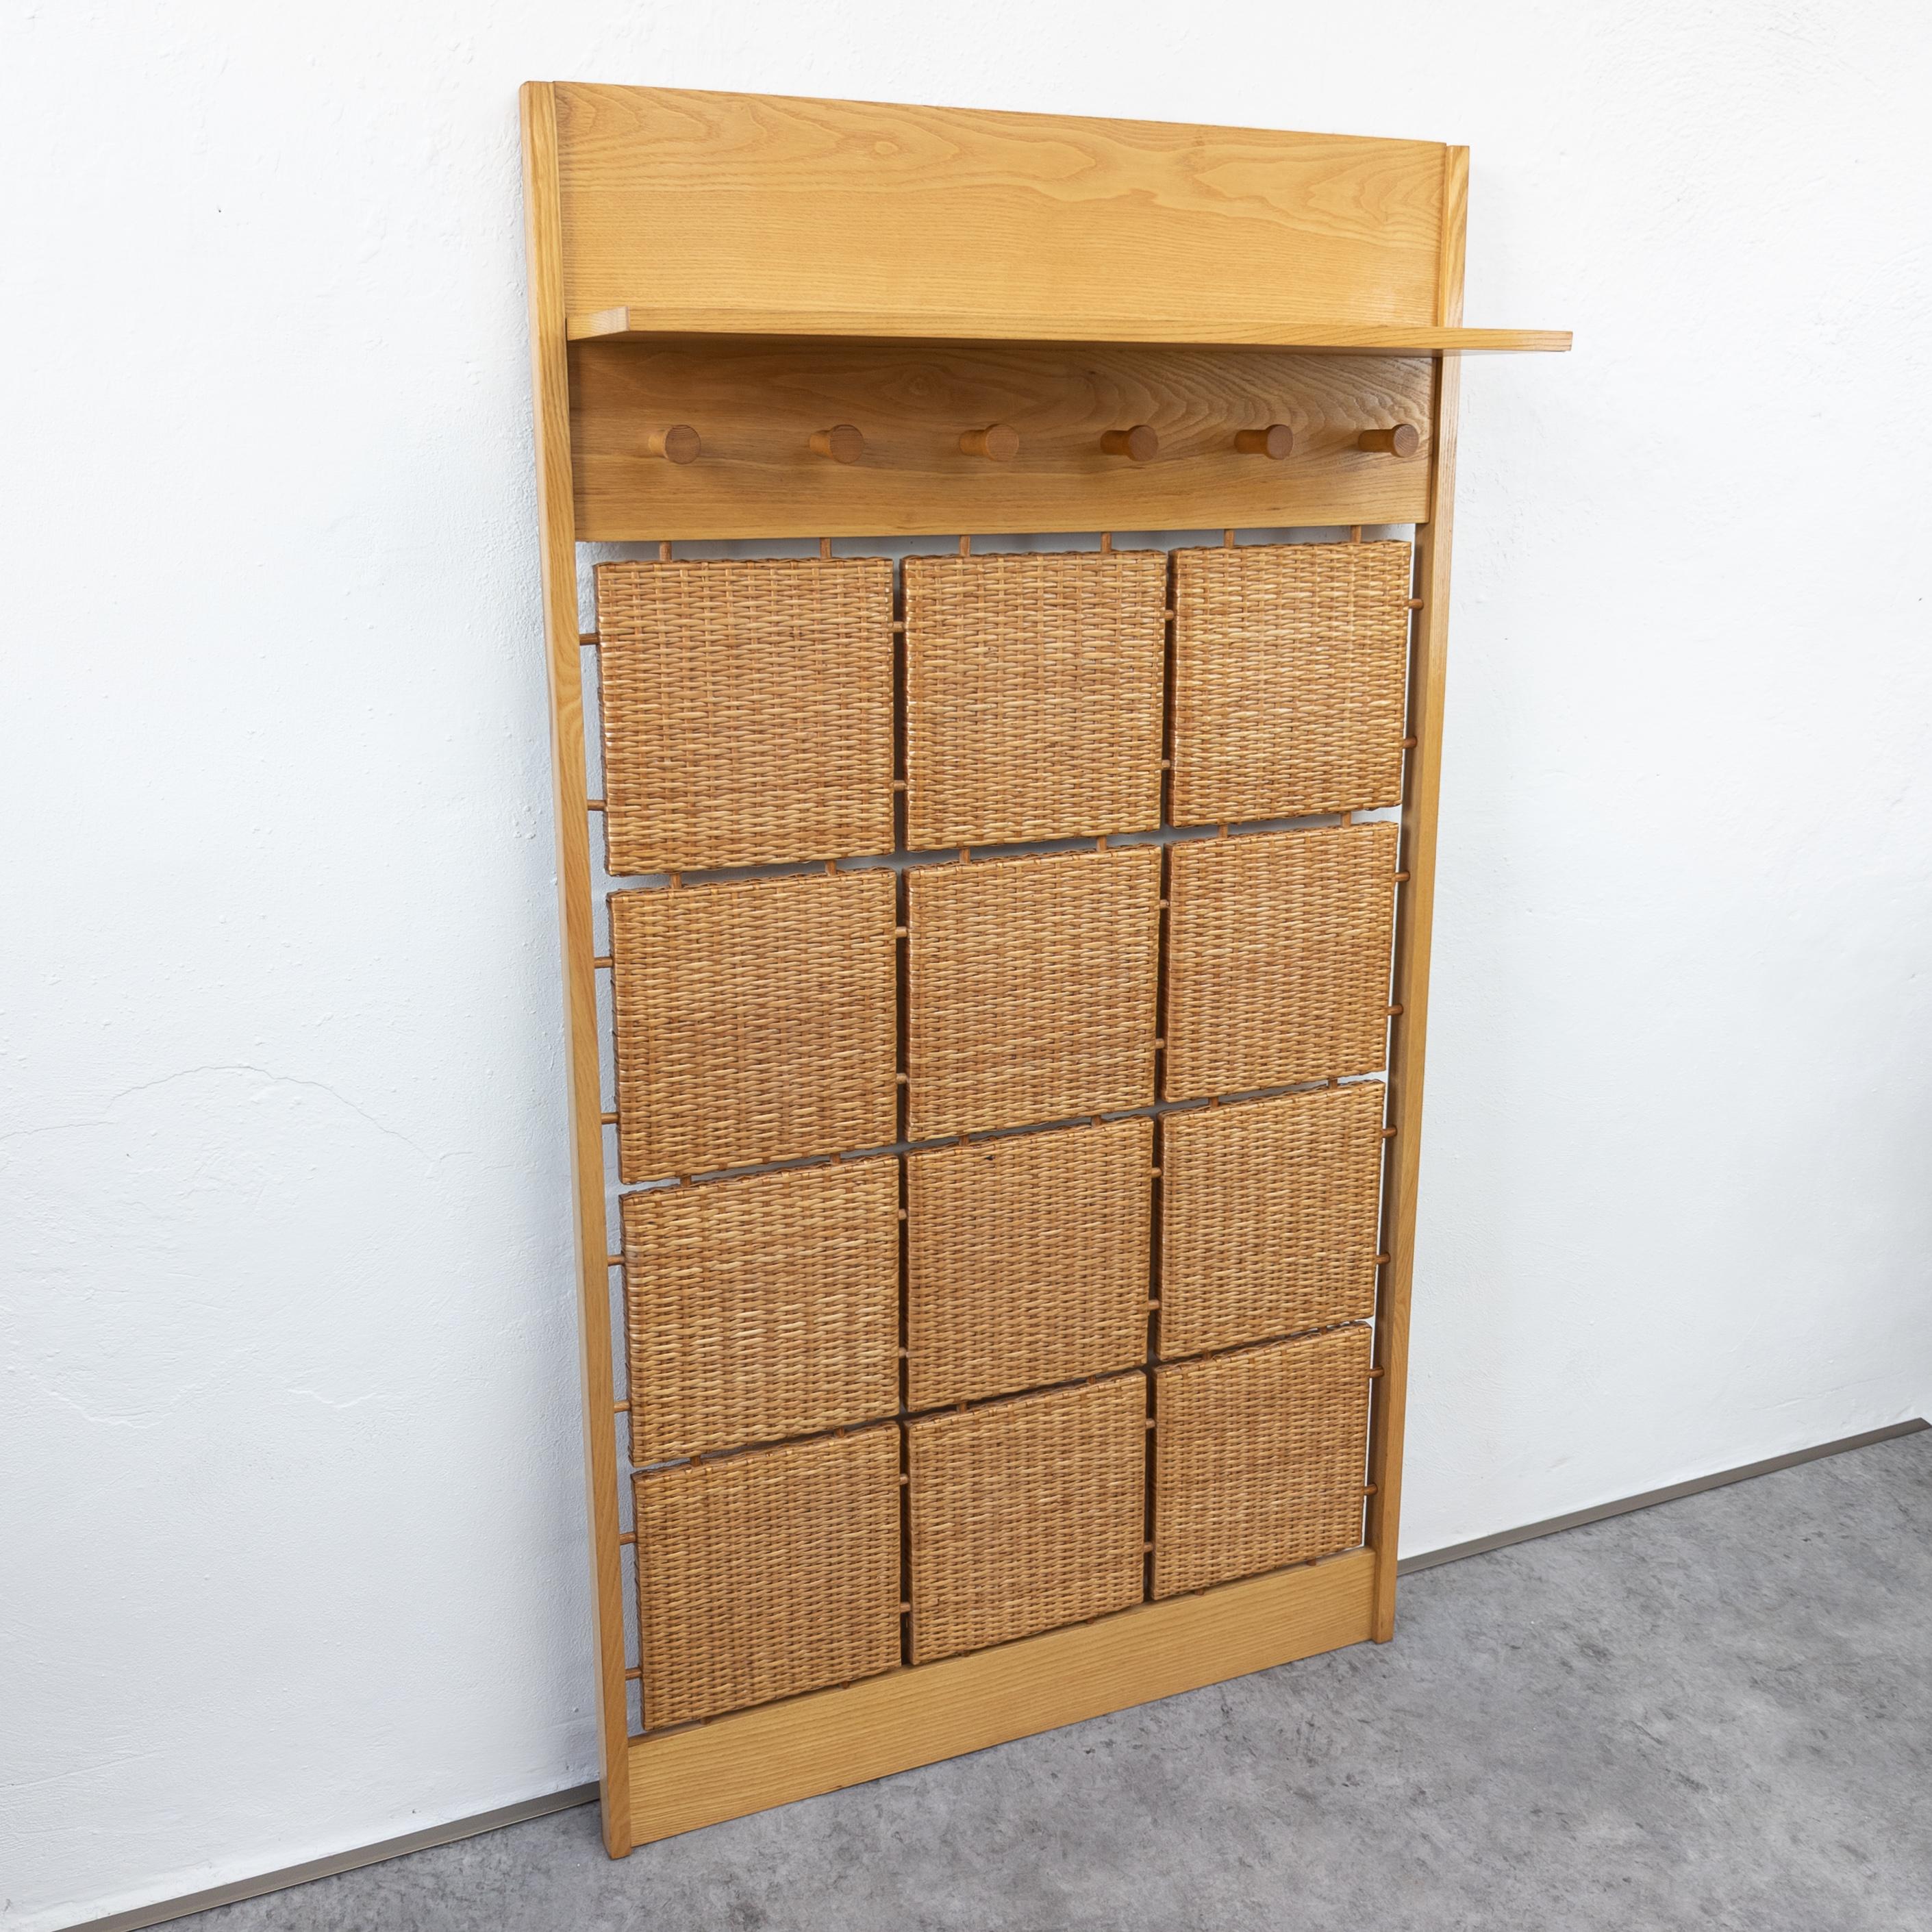 Entry hall wall coat rack designed by Jan Kalous, manufactured by ULUV, former Czechoslovakia in 1960's. Made of beech wood and rattan. In excellent original condition. Height 120 cm, width 90 cm, depth 25 cm.